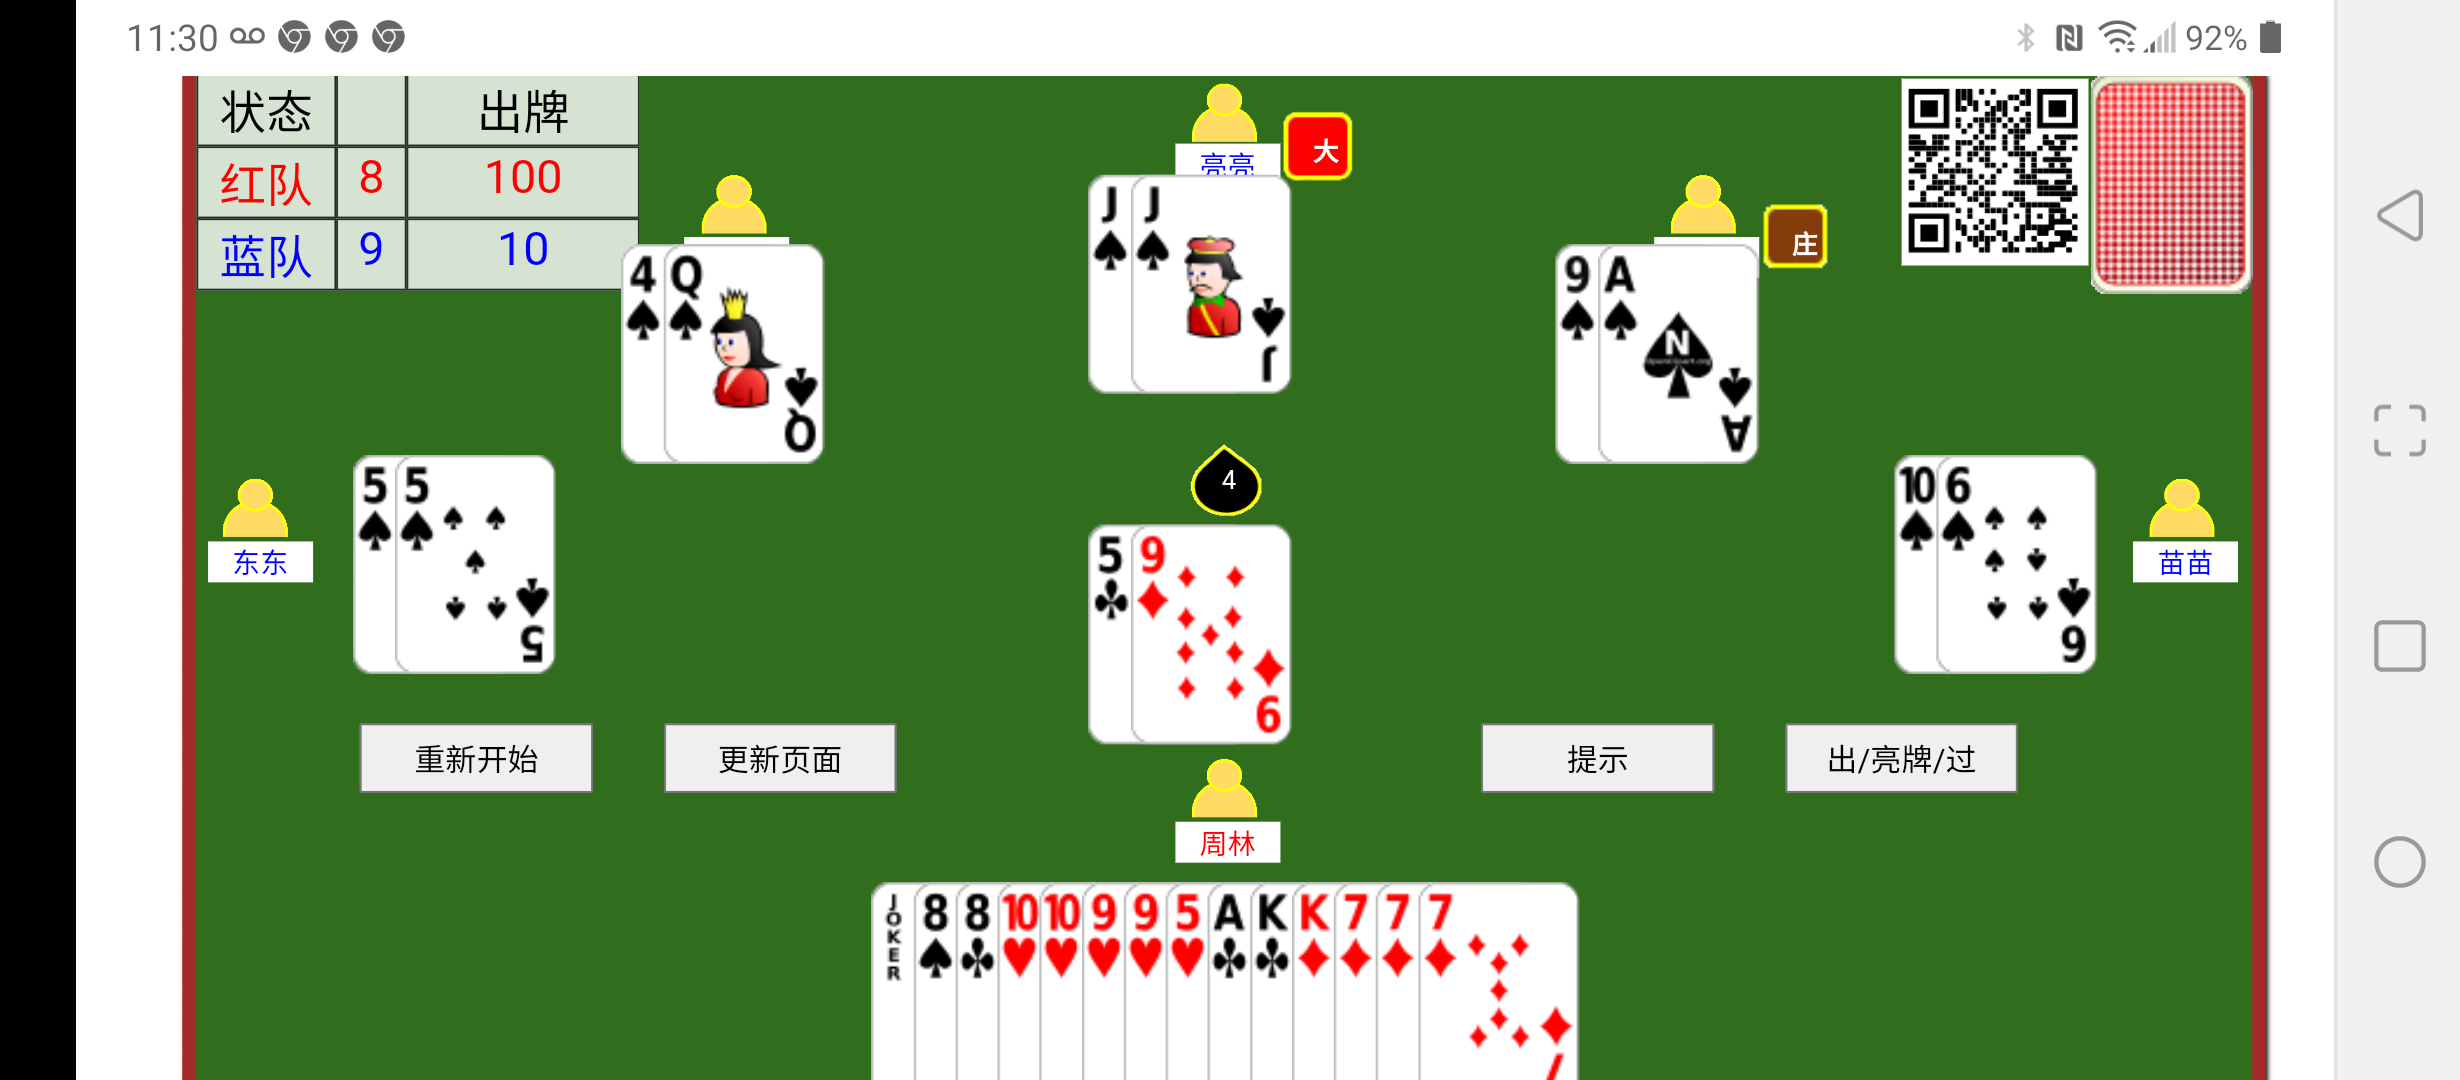 html5 tractor card game Screenshot_20220122-113035.png